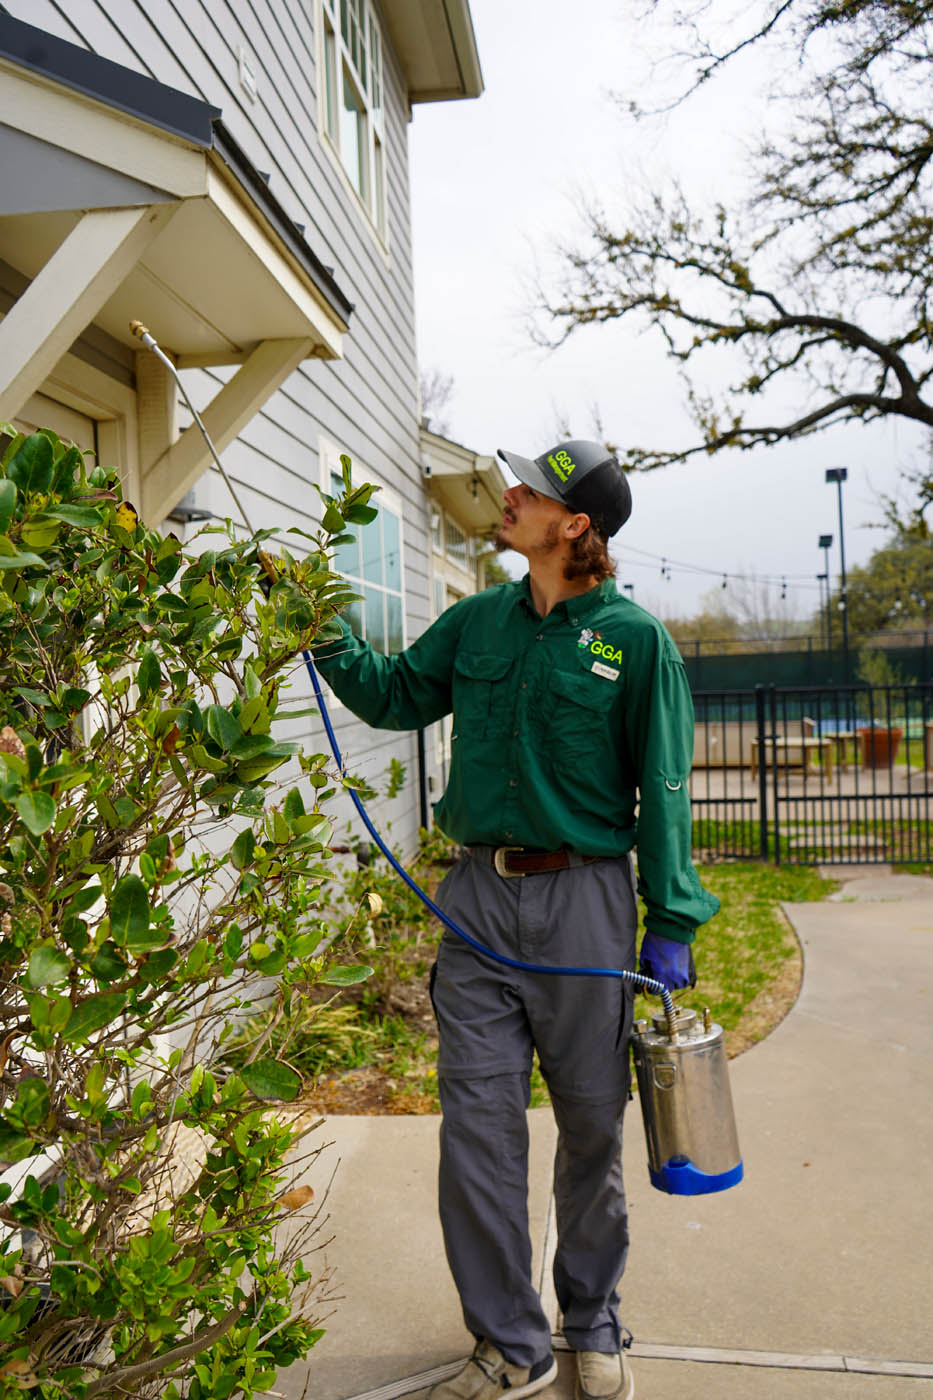 A GGA Pest Management employee working on residential home - choose GGA Pest Management for the best Waco exterminator pest control services.